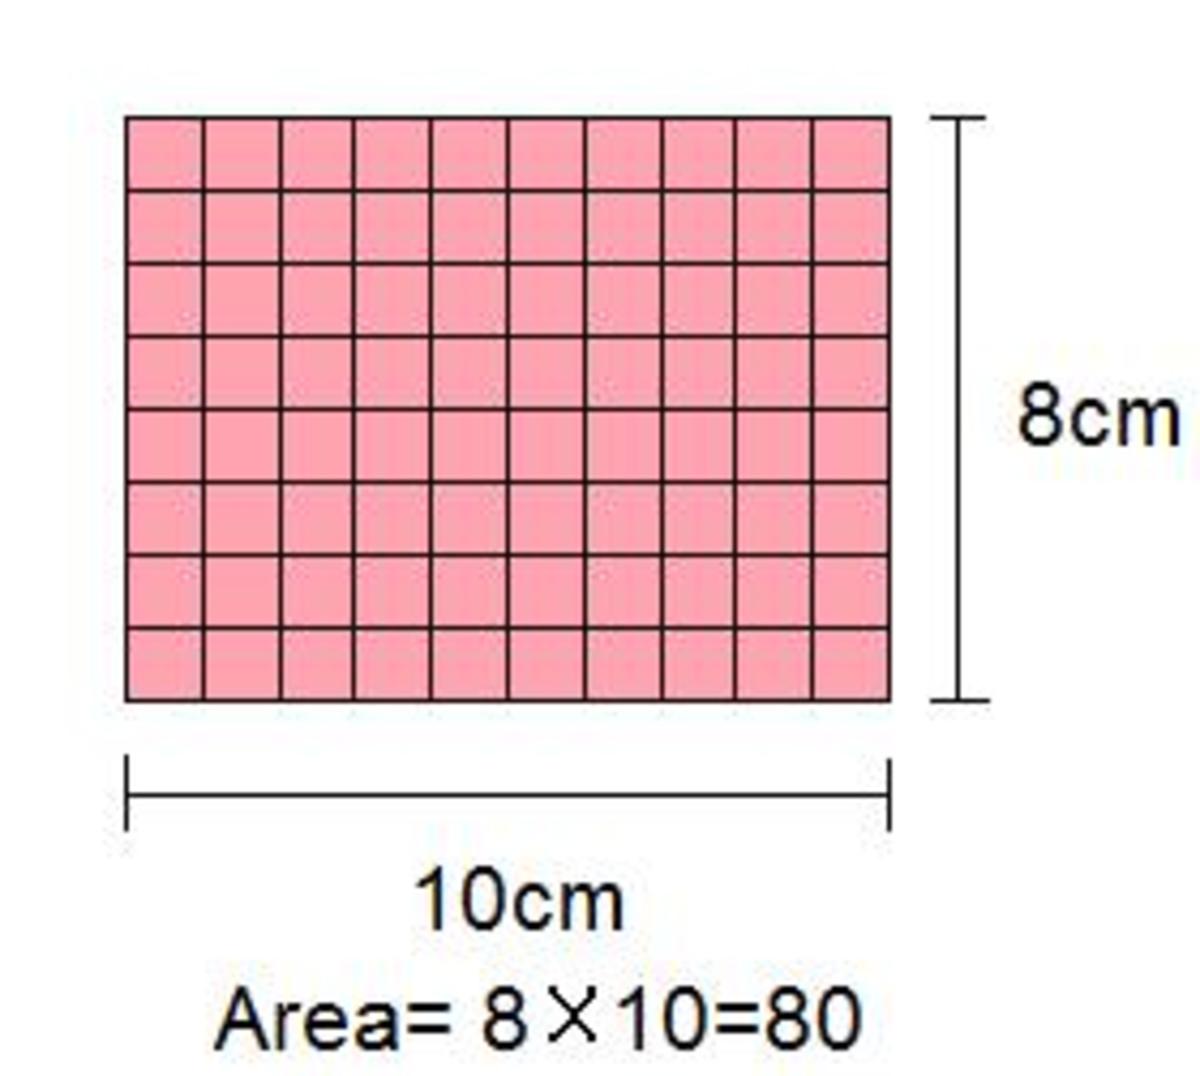 How to find area of shapes and how to find the volume of objects. (2d objects included)